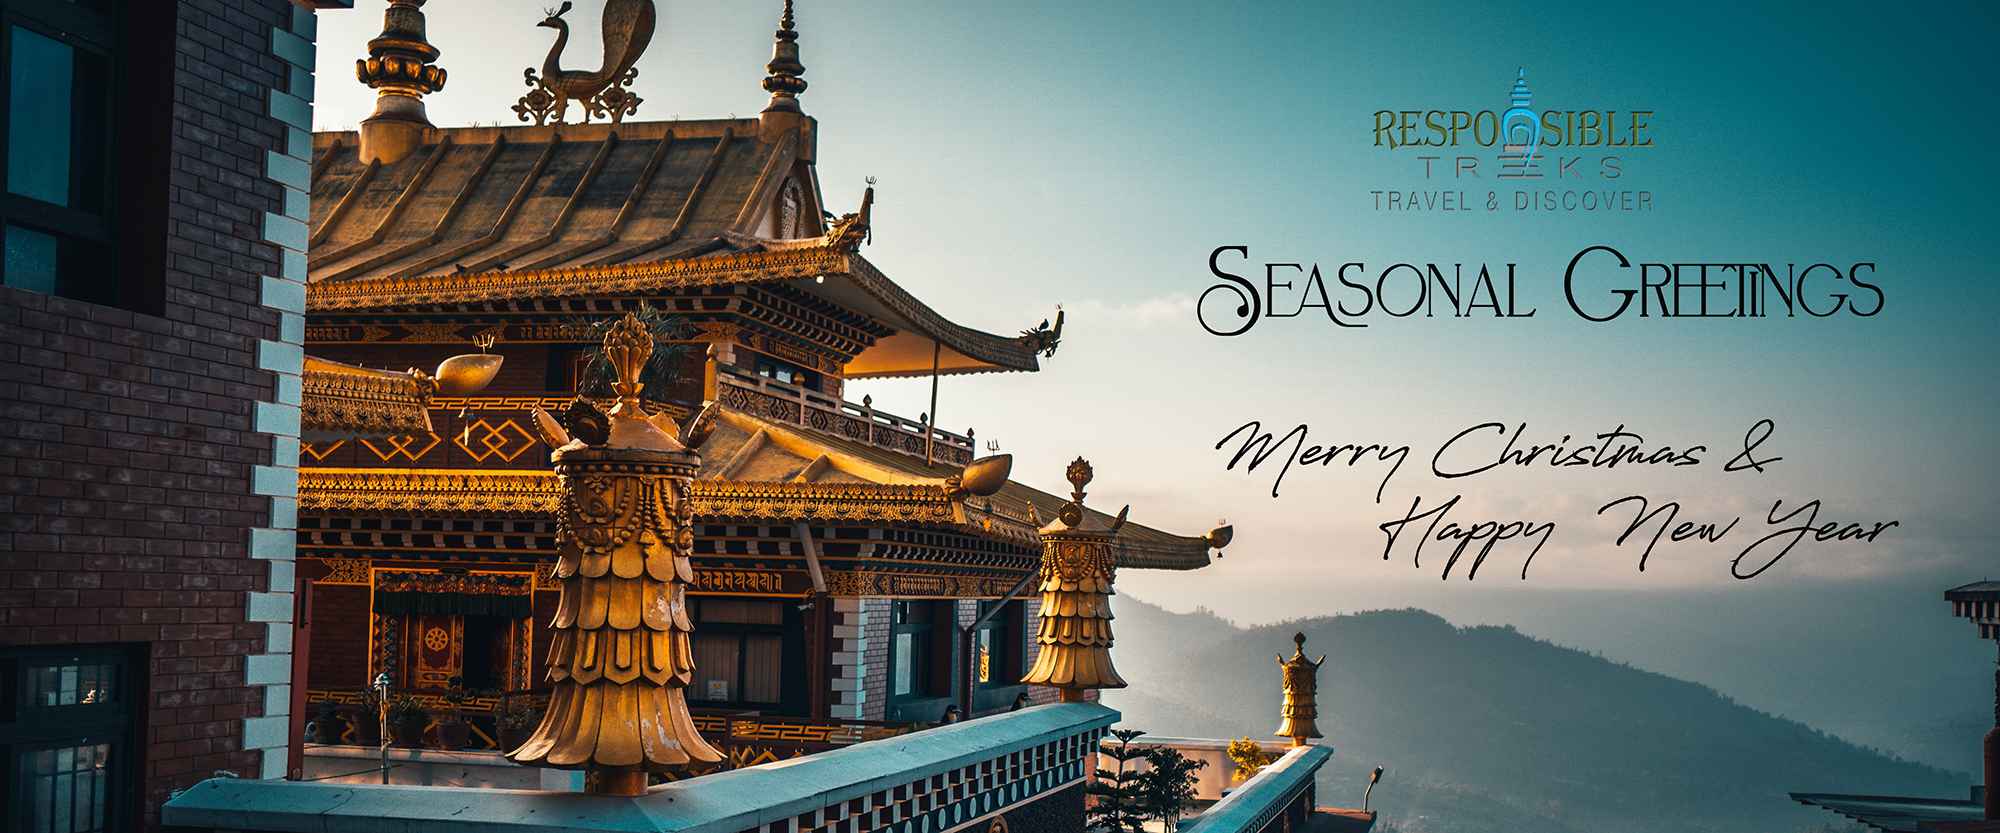 Holiday Greetings from Nepal